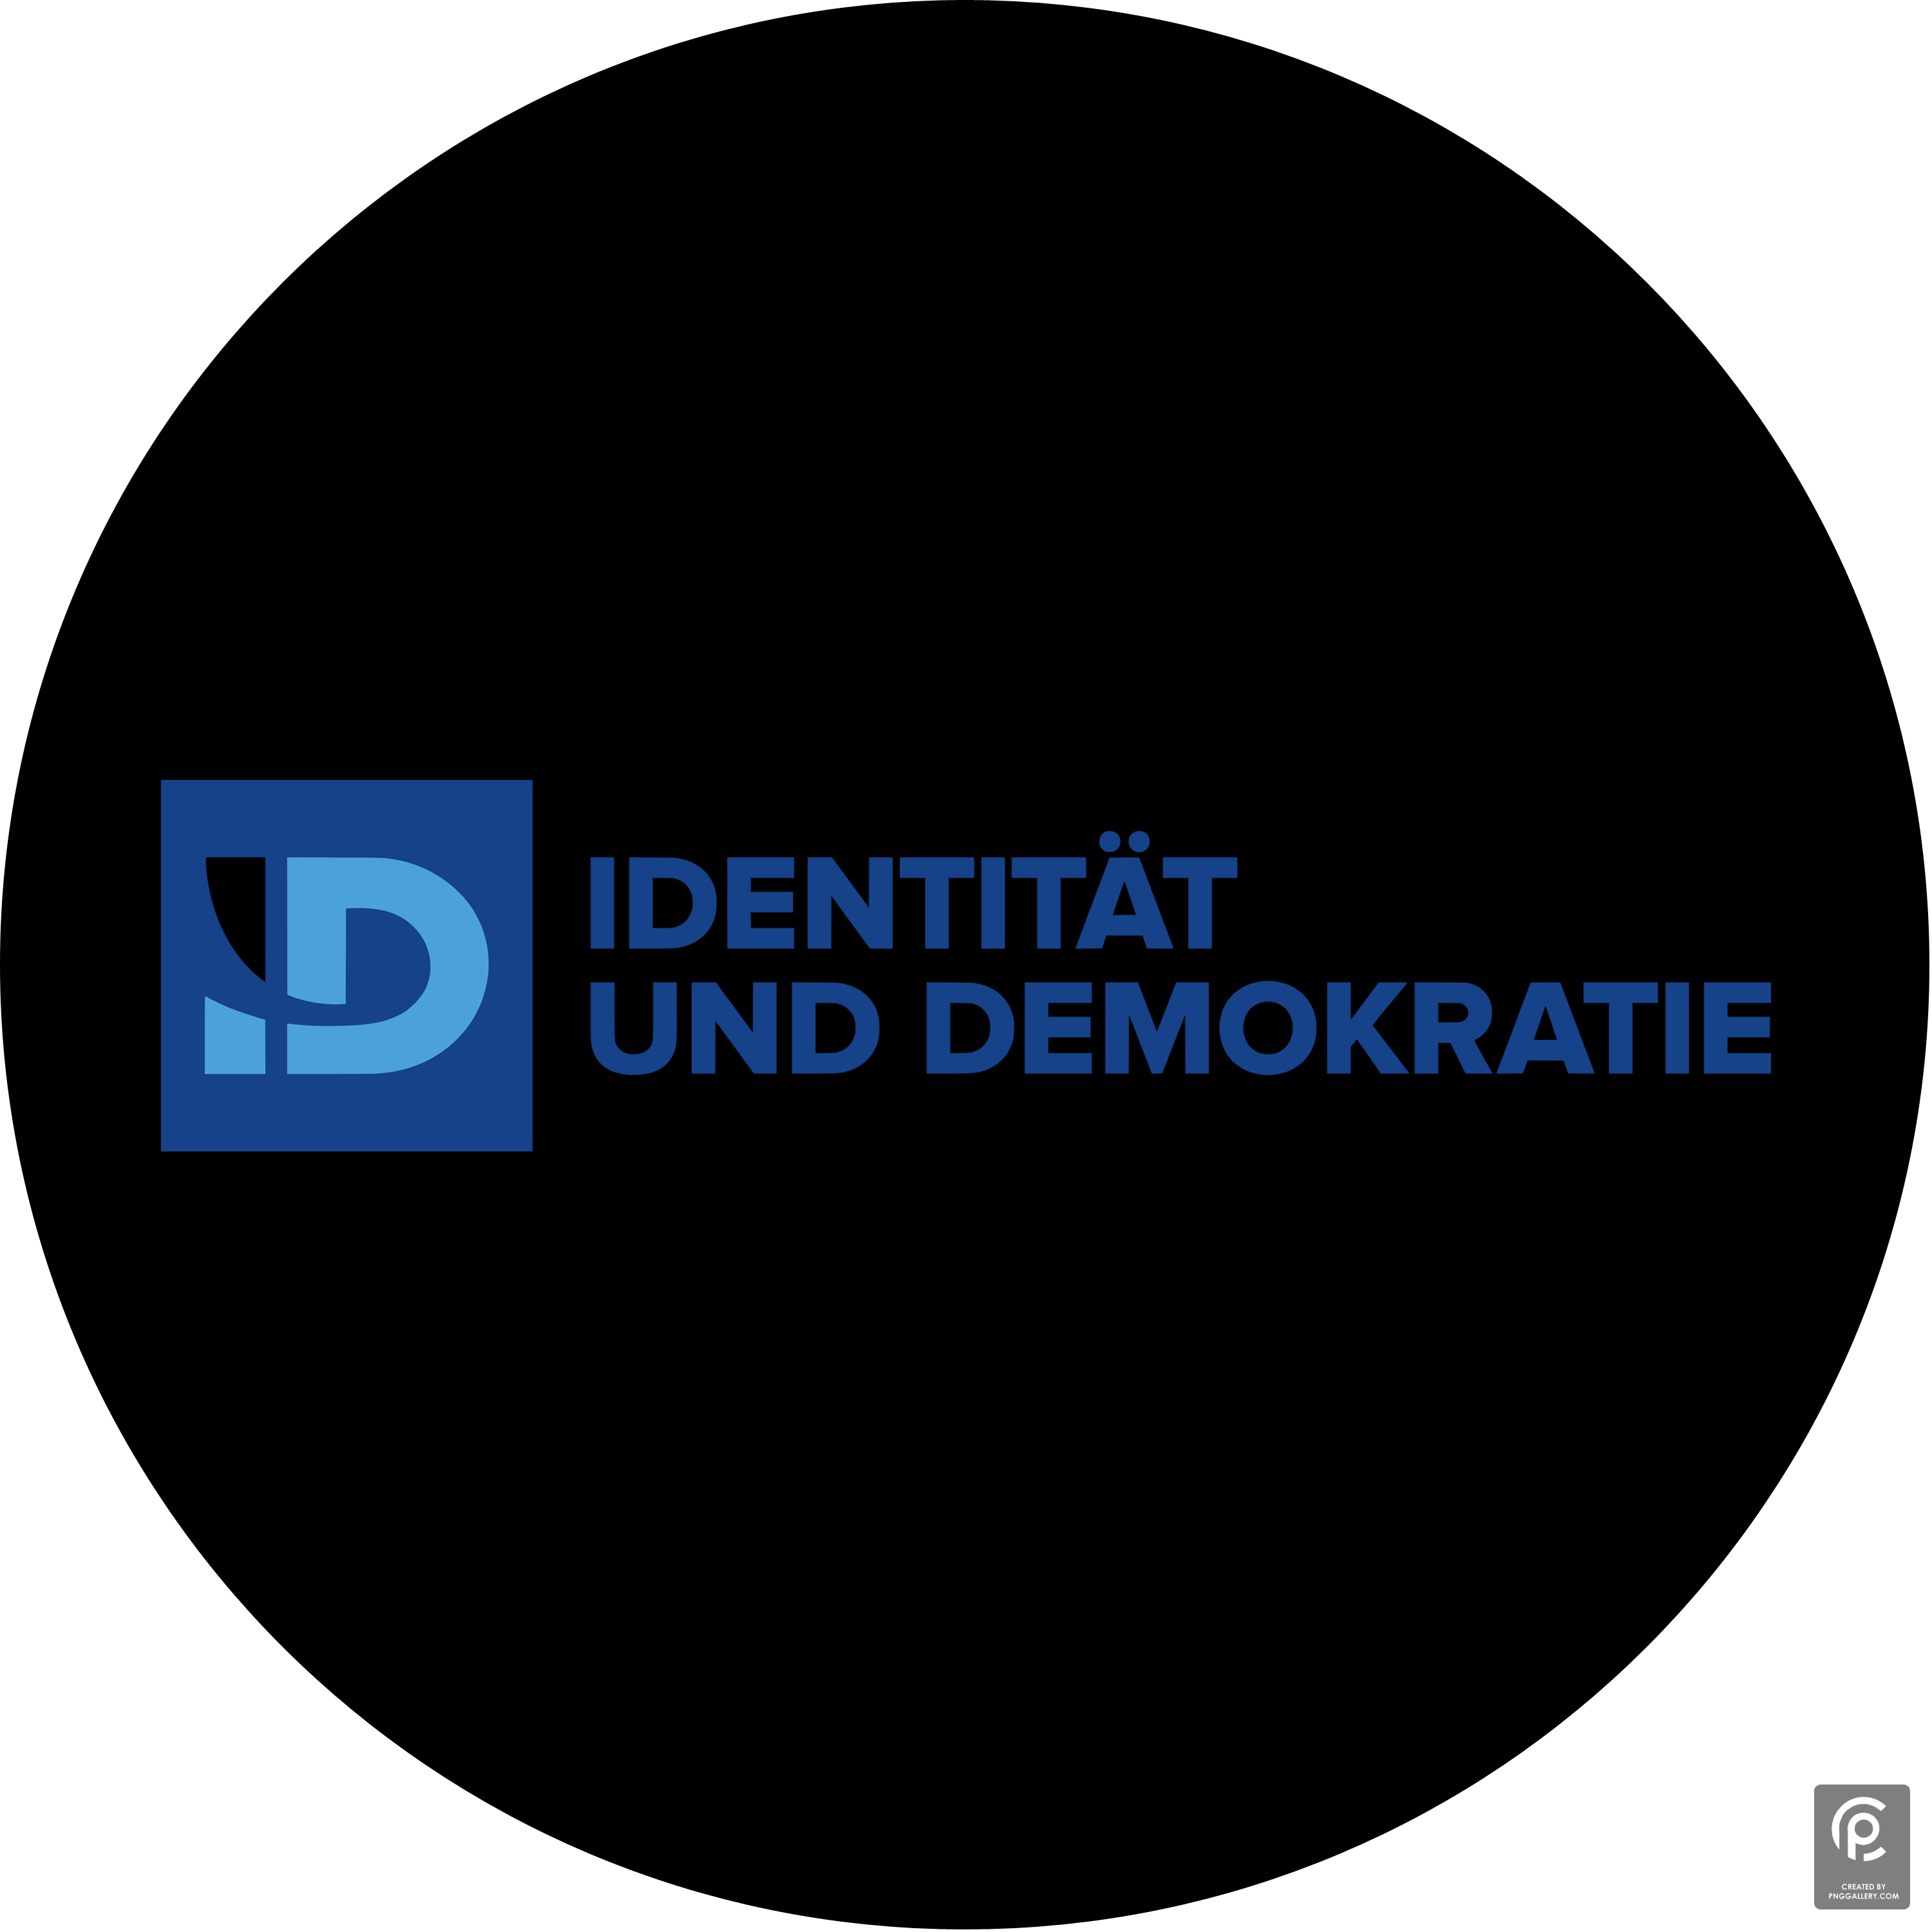 ID Group Ed Logo Transparent Gallery